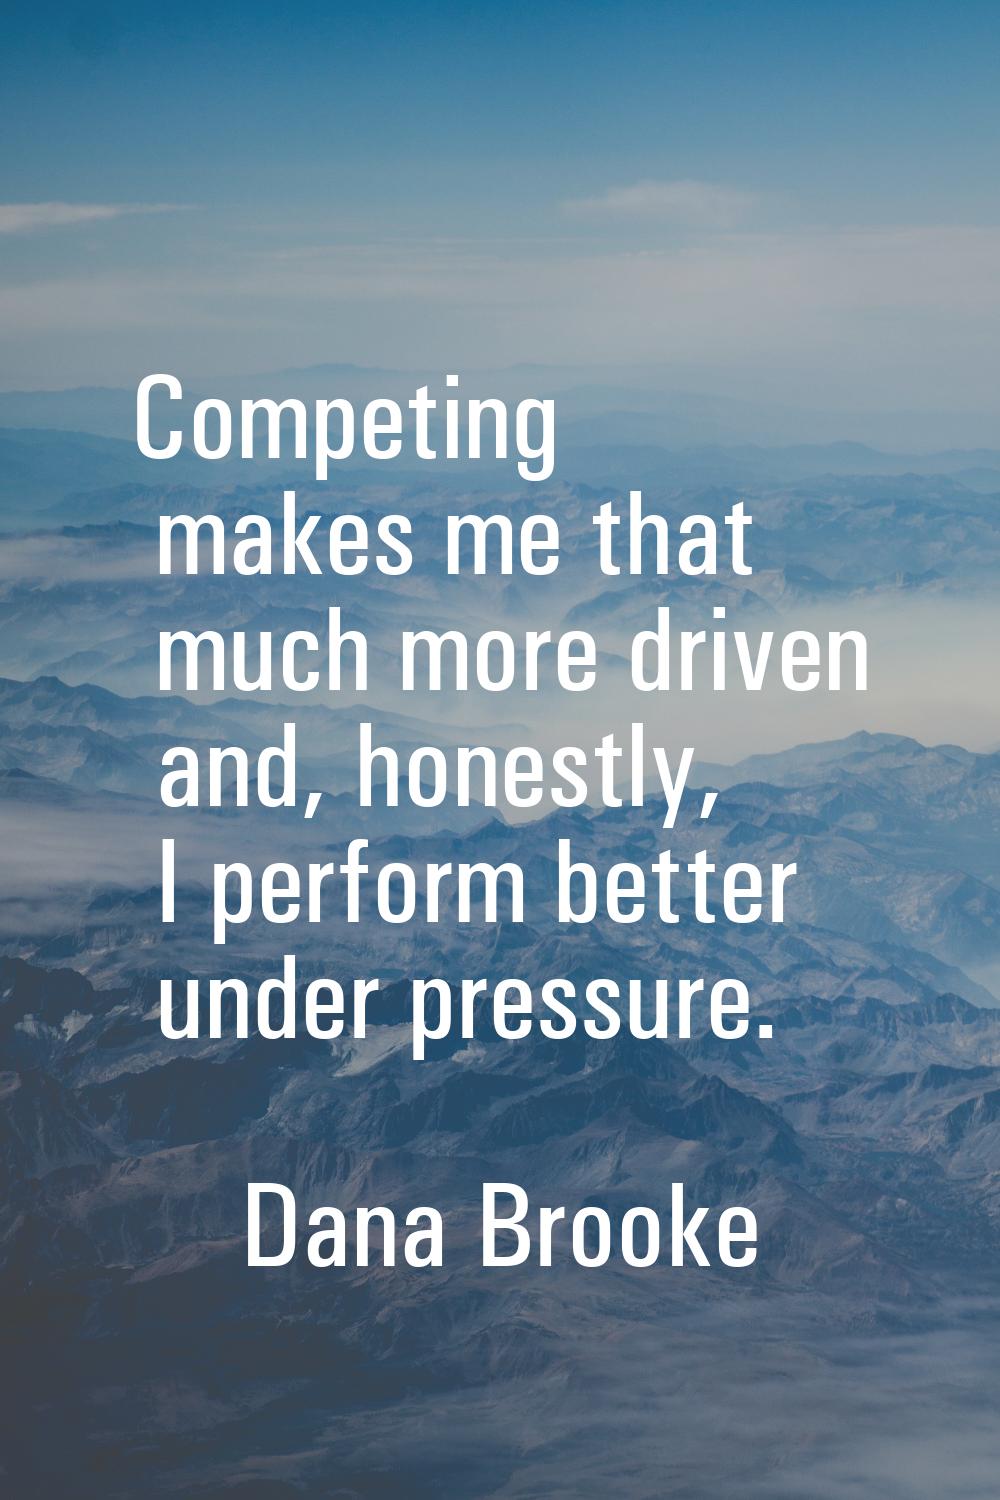 Competing makes me that much more driven and, honestly, I perform better under pressure.